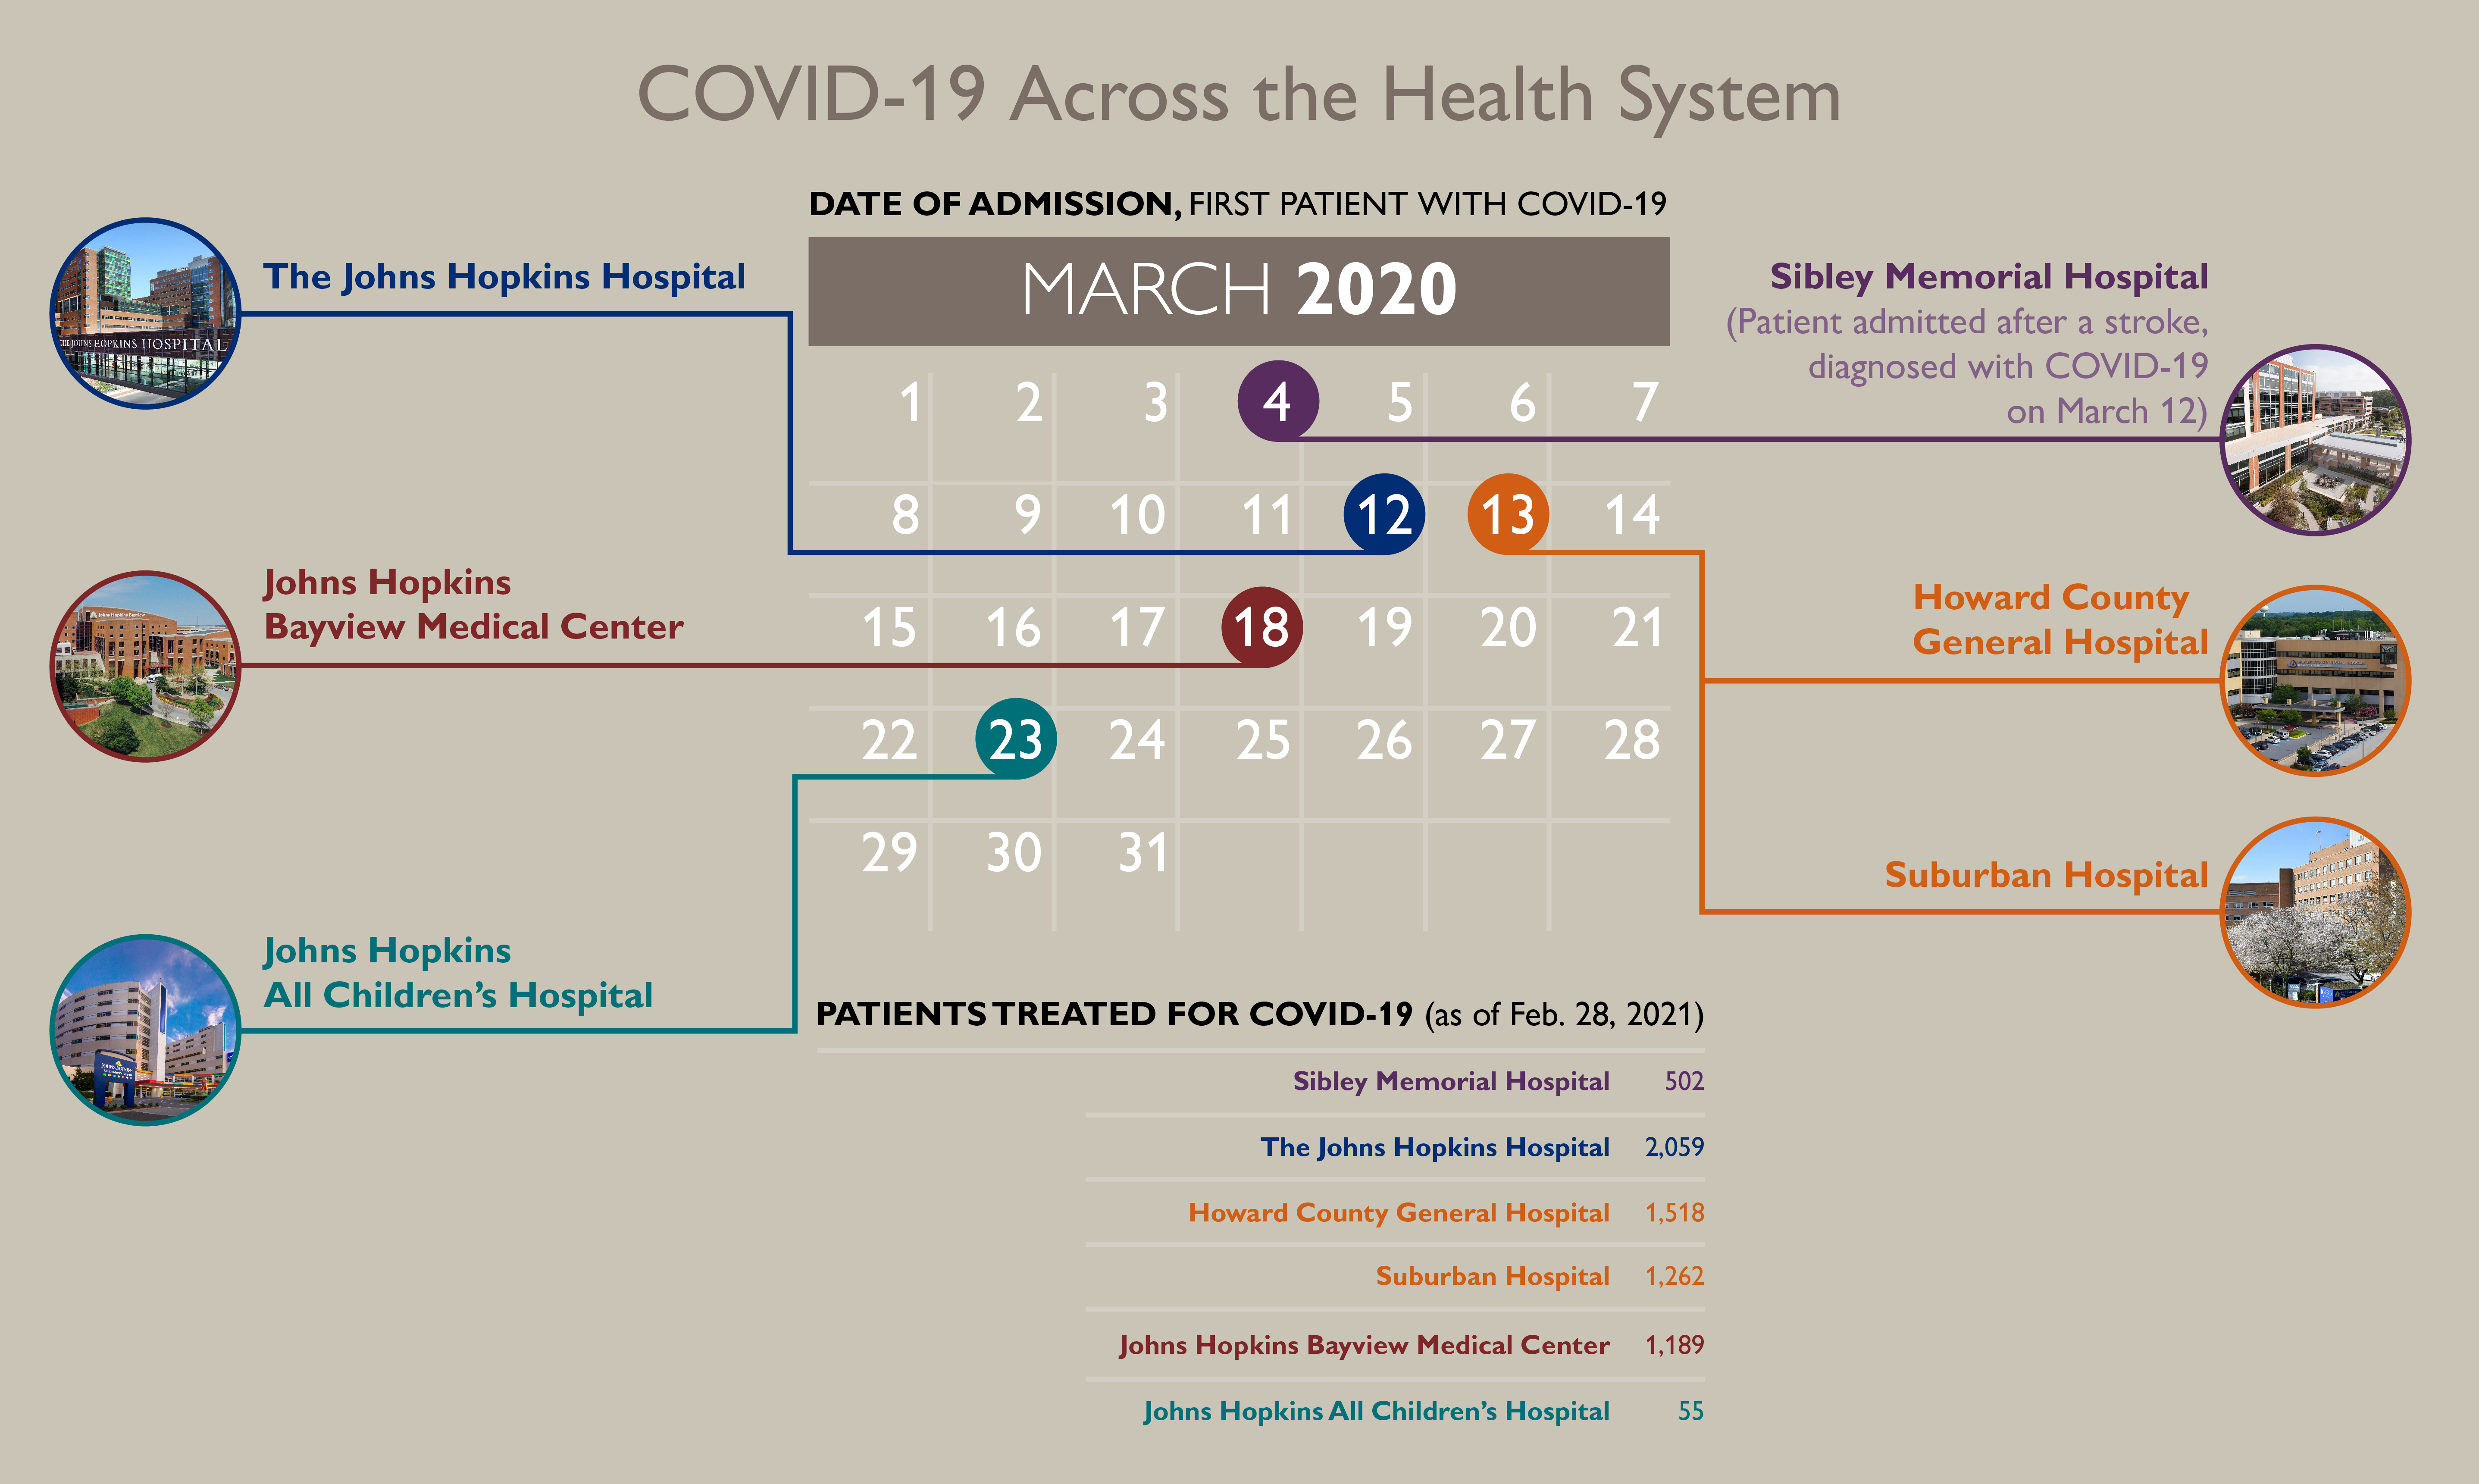 infographic showing date of first patient admitted with COVID at each hospital, and total number of patients treated for COVID at each hospital